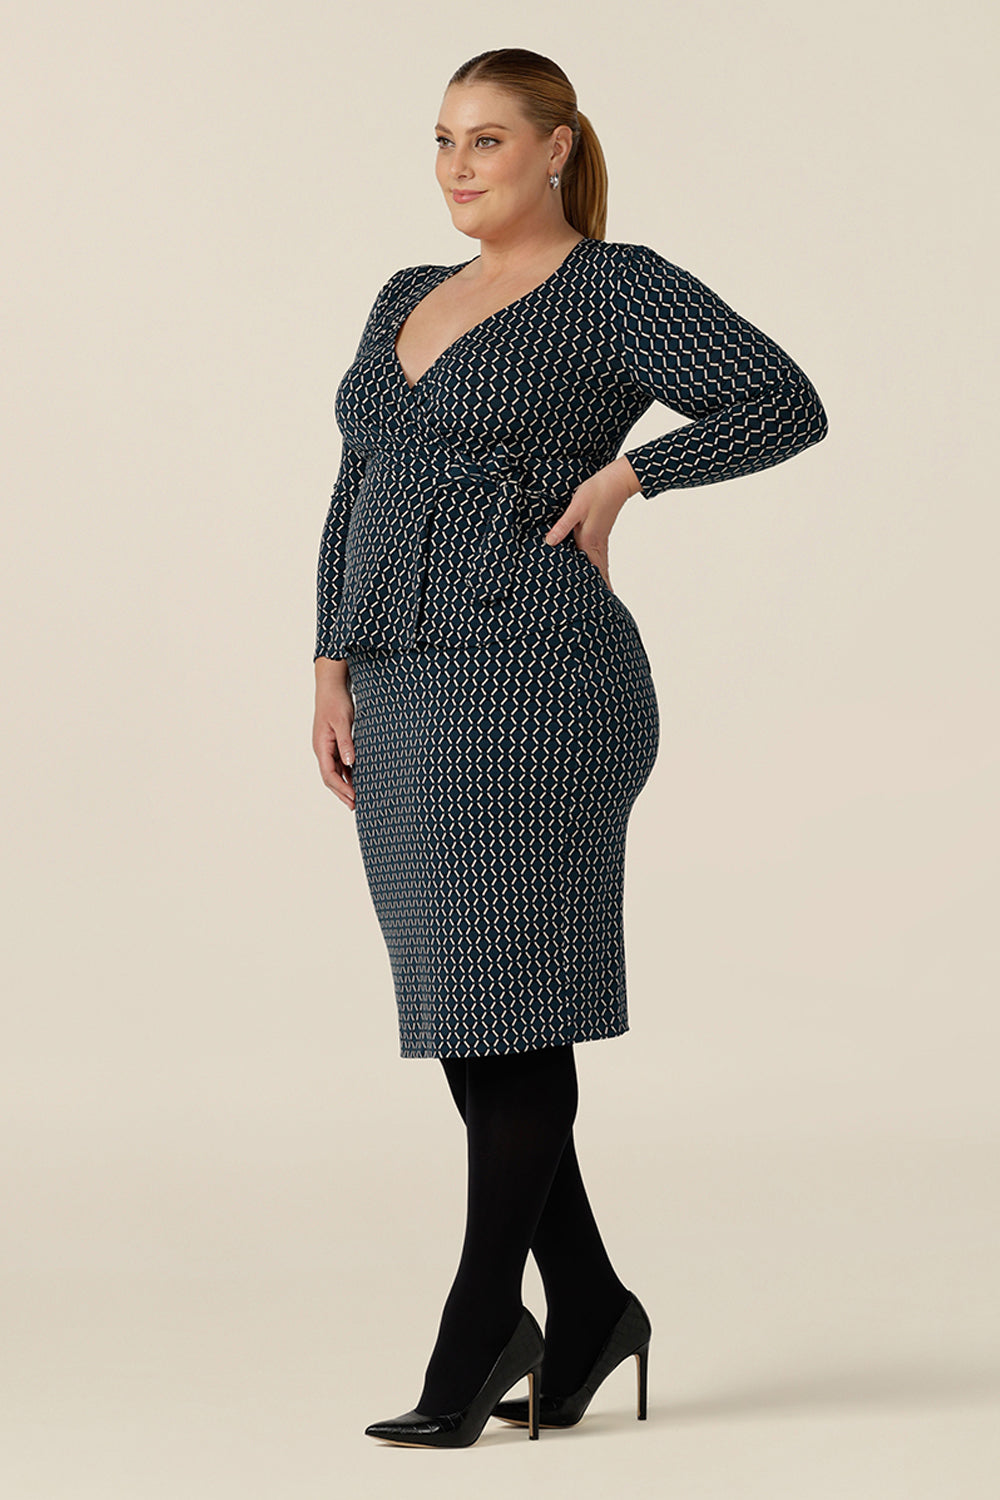 Good work wear for plus size women, a knee-length tube skirt in geometric print is worn with a long sleeve wrap top in matching print. Made in Australia, shop this comfortable corporate skirt online in sizes 8 to 24.